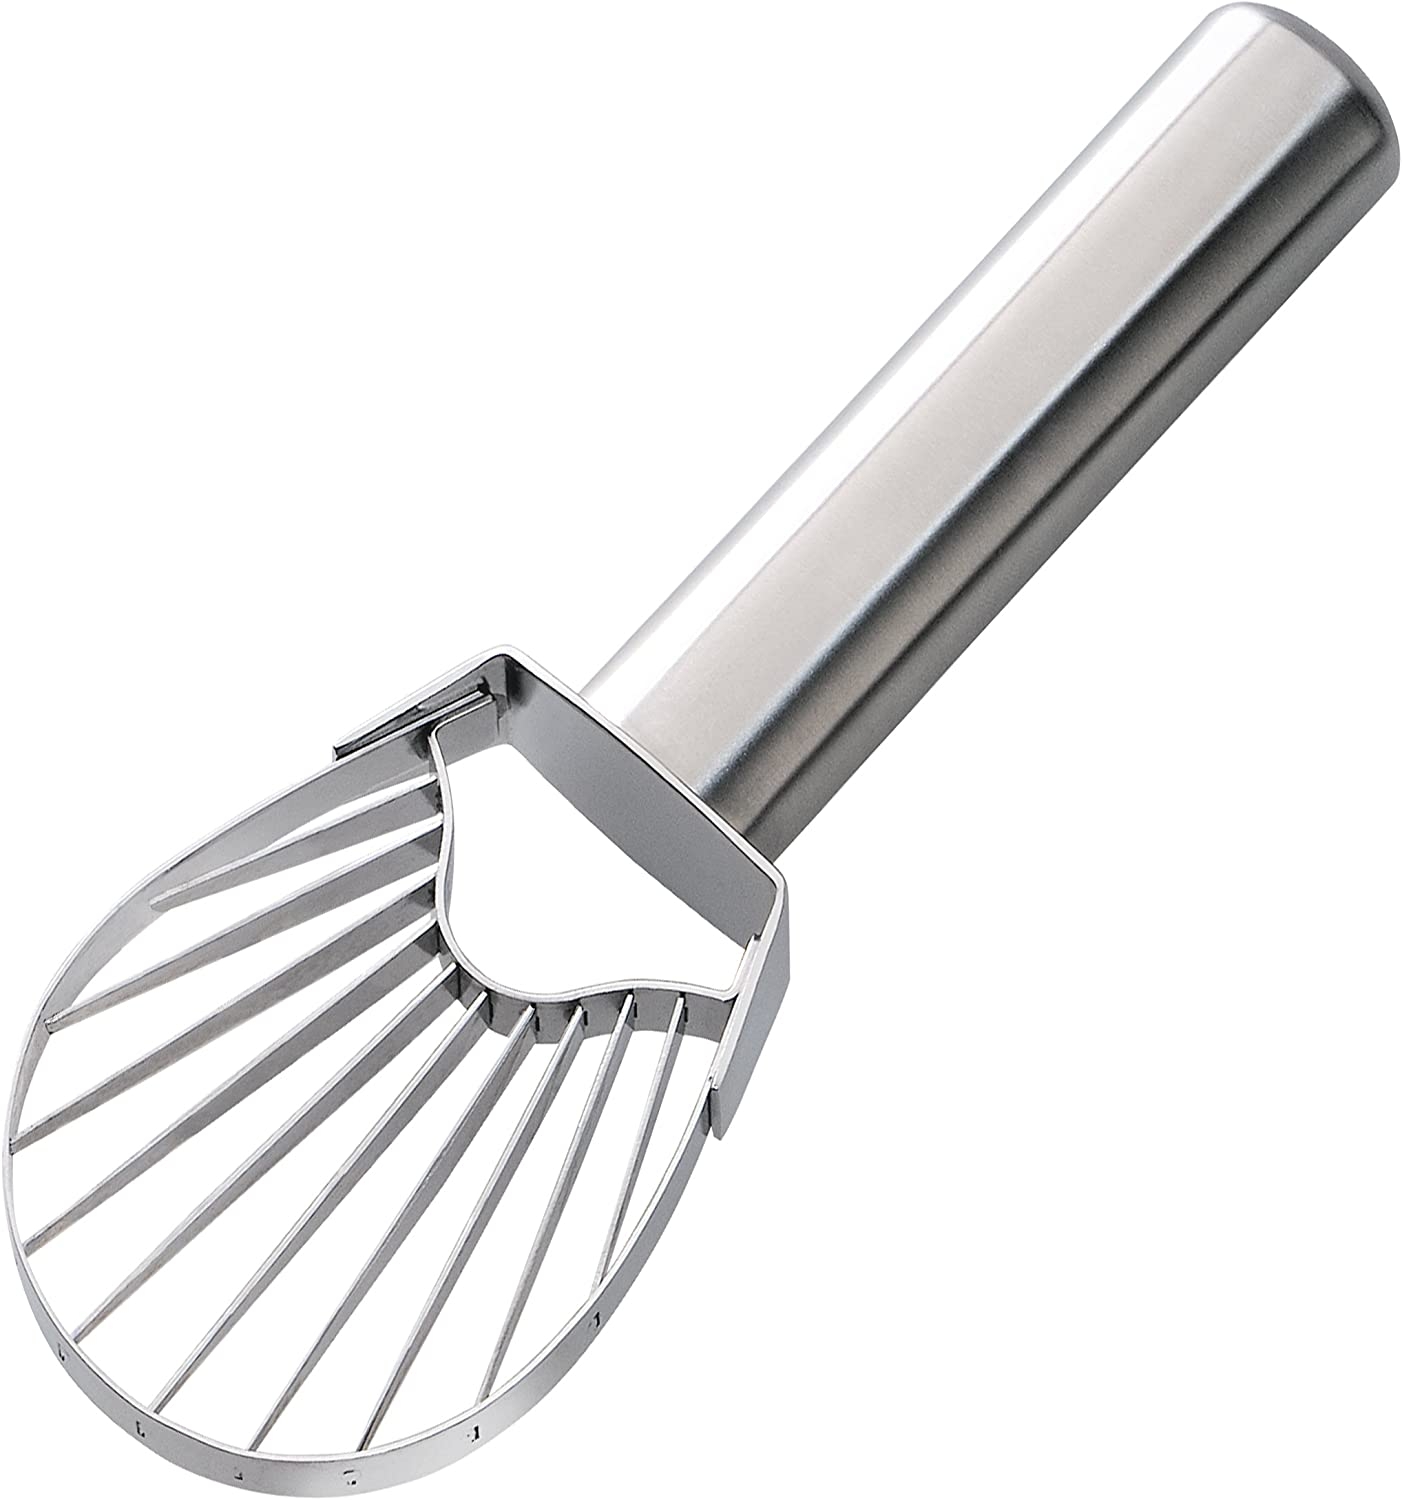 Moha Stainless Steel Avocado Slicer, 7.28-Inch, Silver Import To Shop ×Product customization General Description Gallery